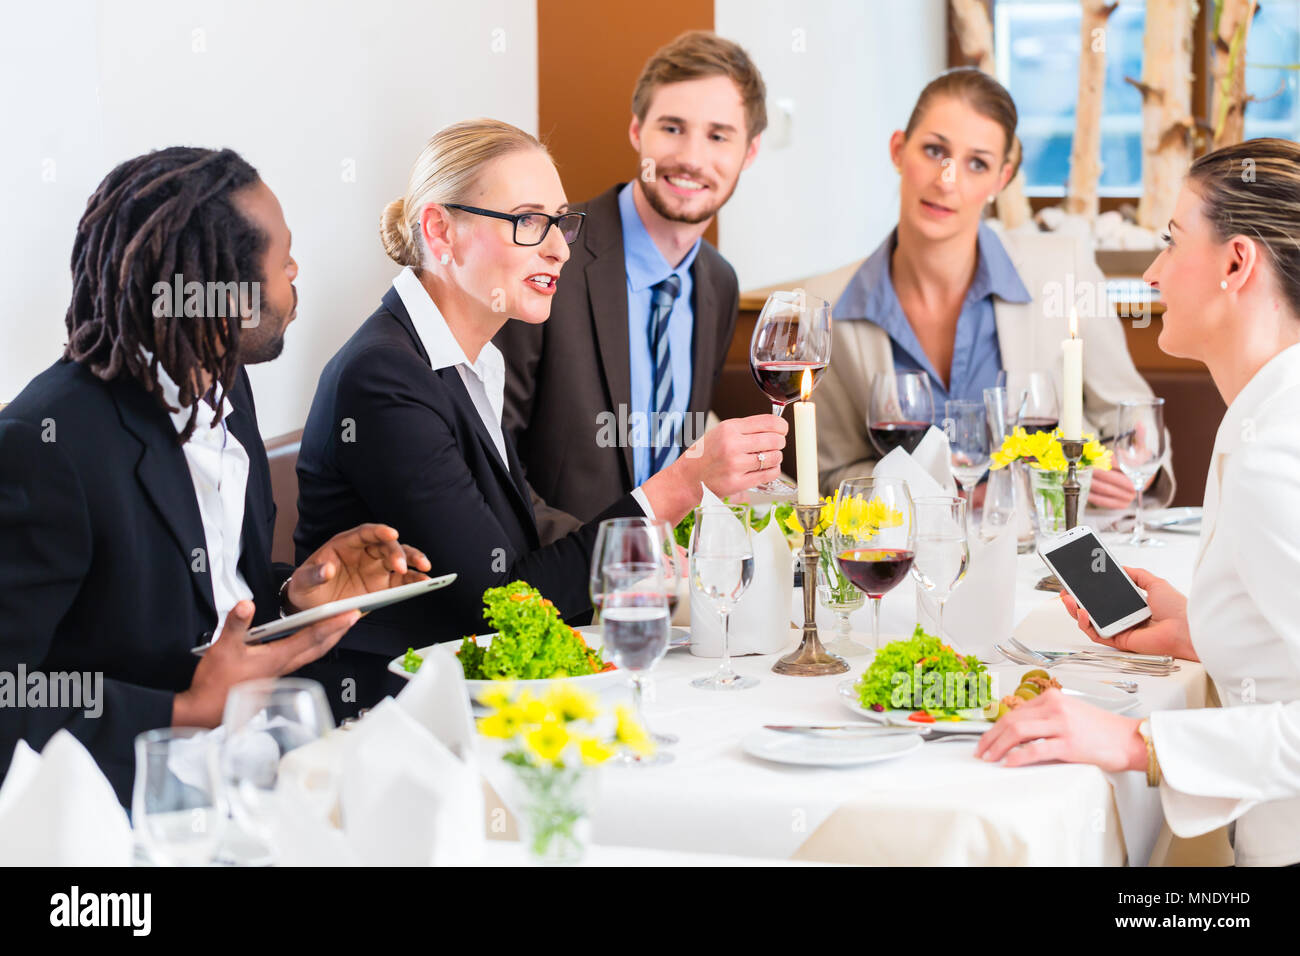 Team at business lunch meeting in restaurant Stock Photo